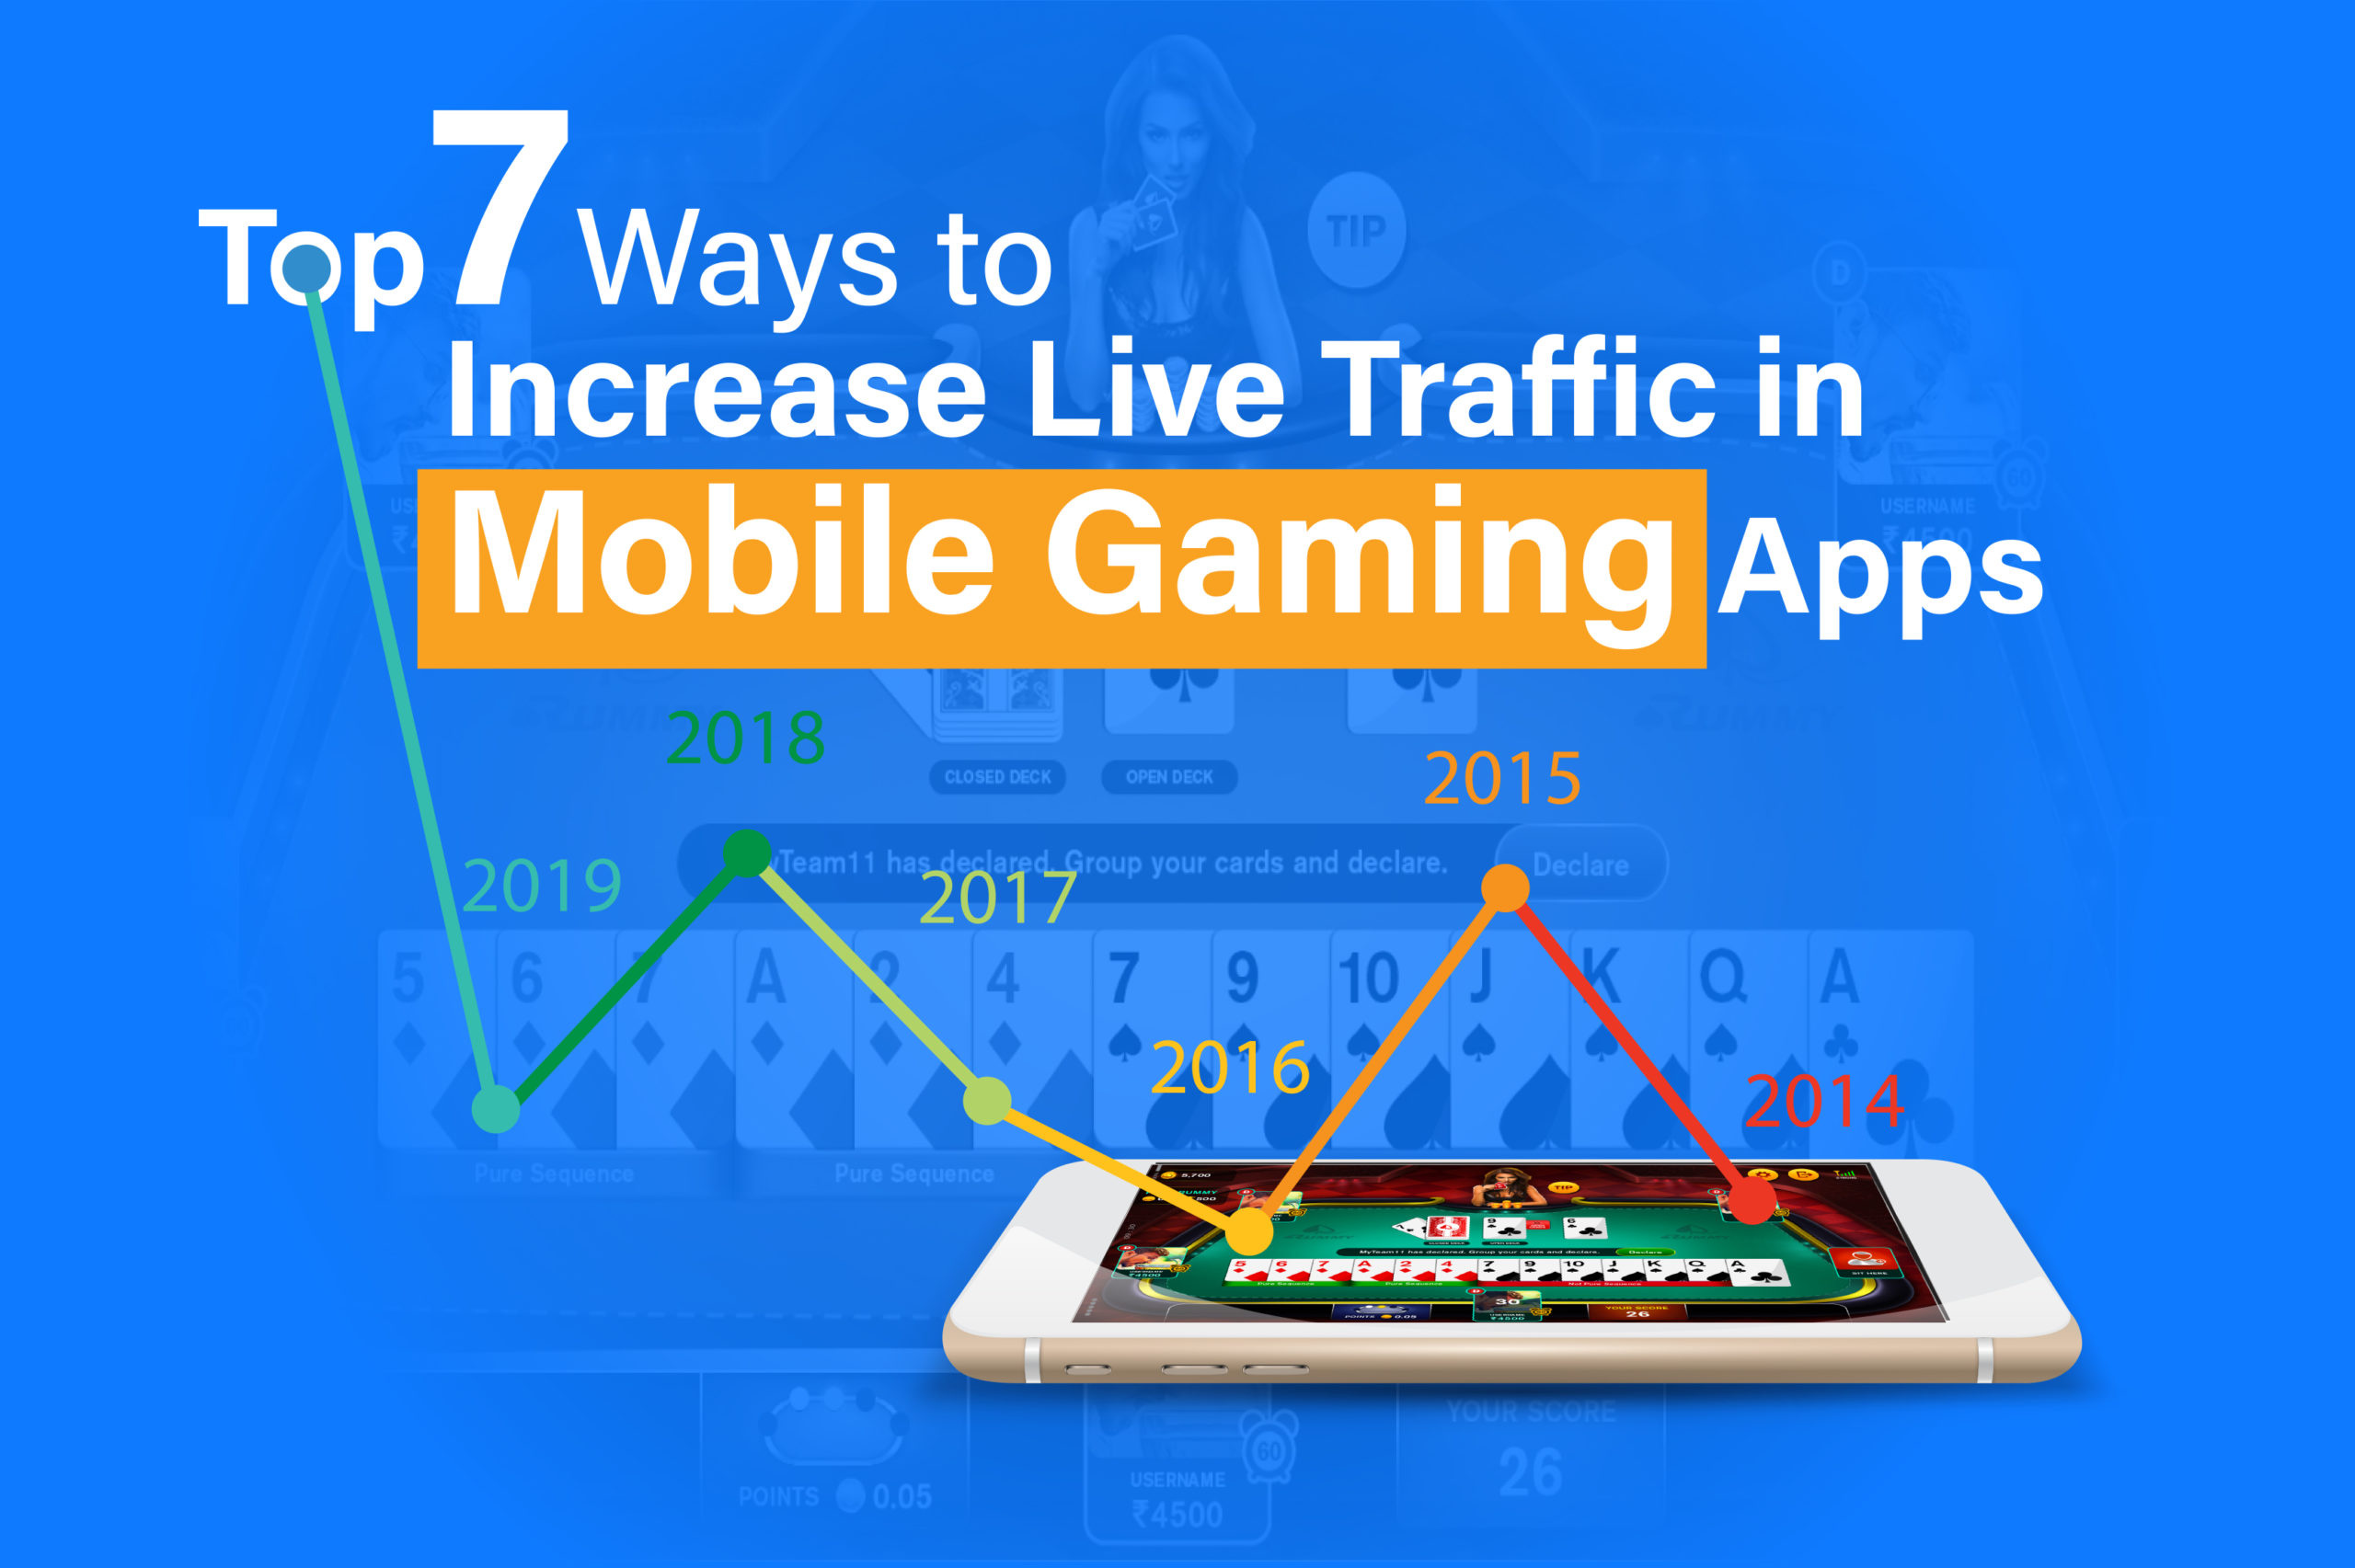 Top 7 Ways to Increase Live Traffic in Mobile Gaming Apps